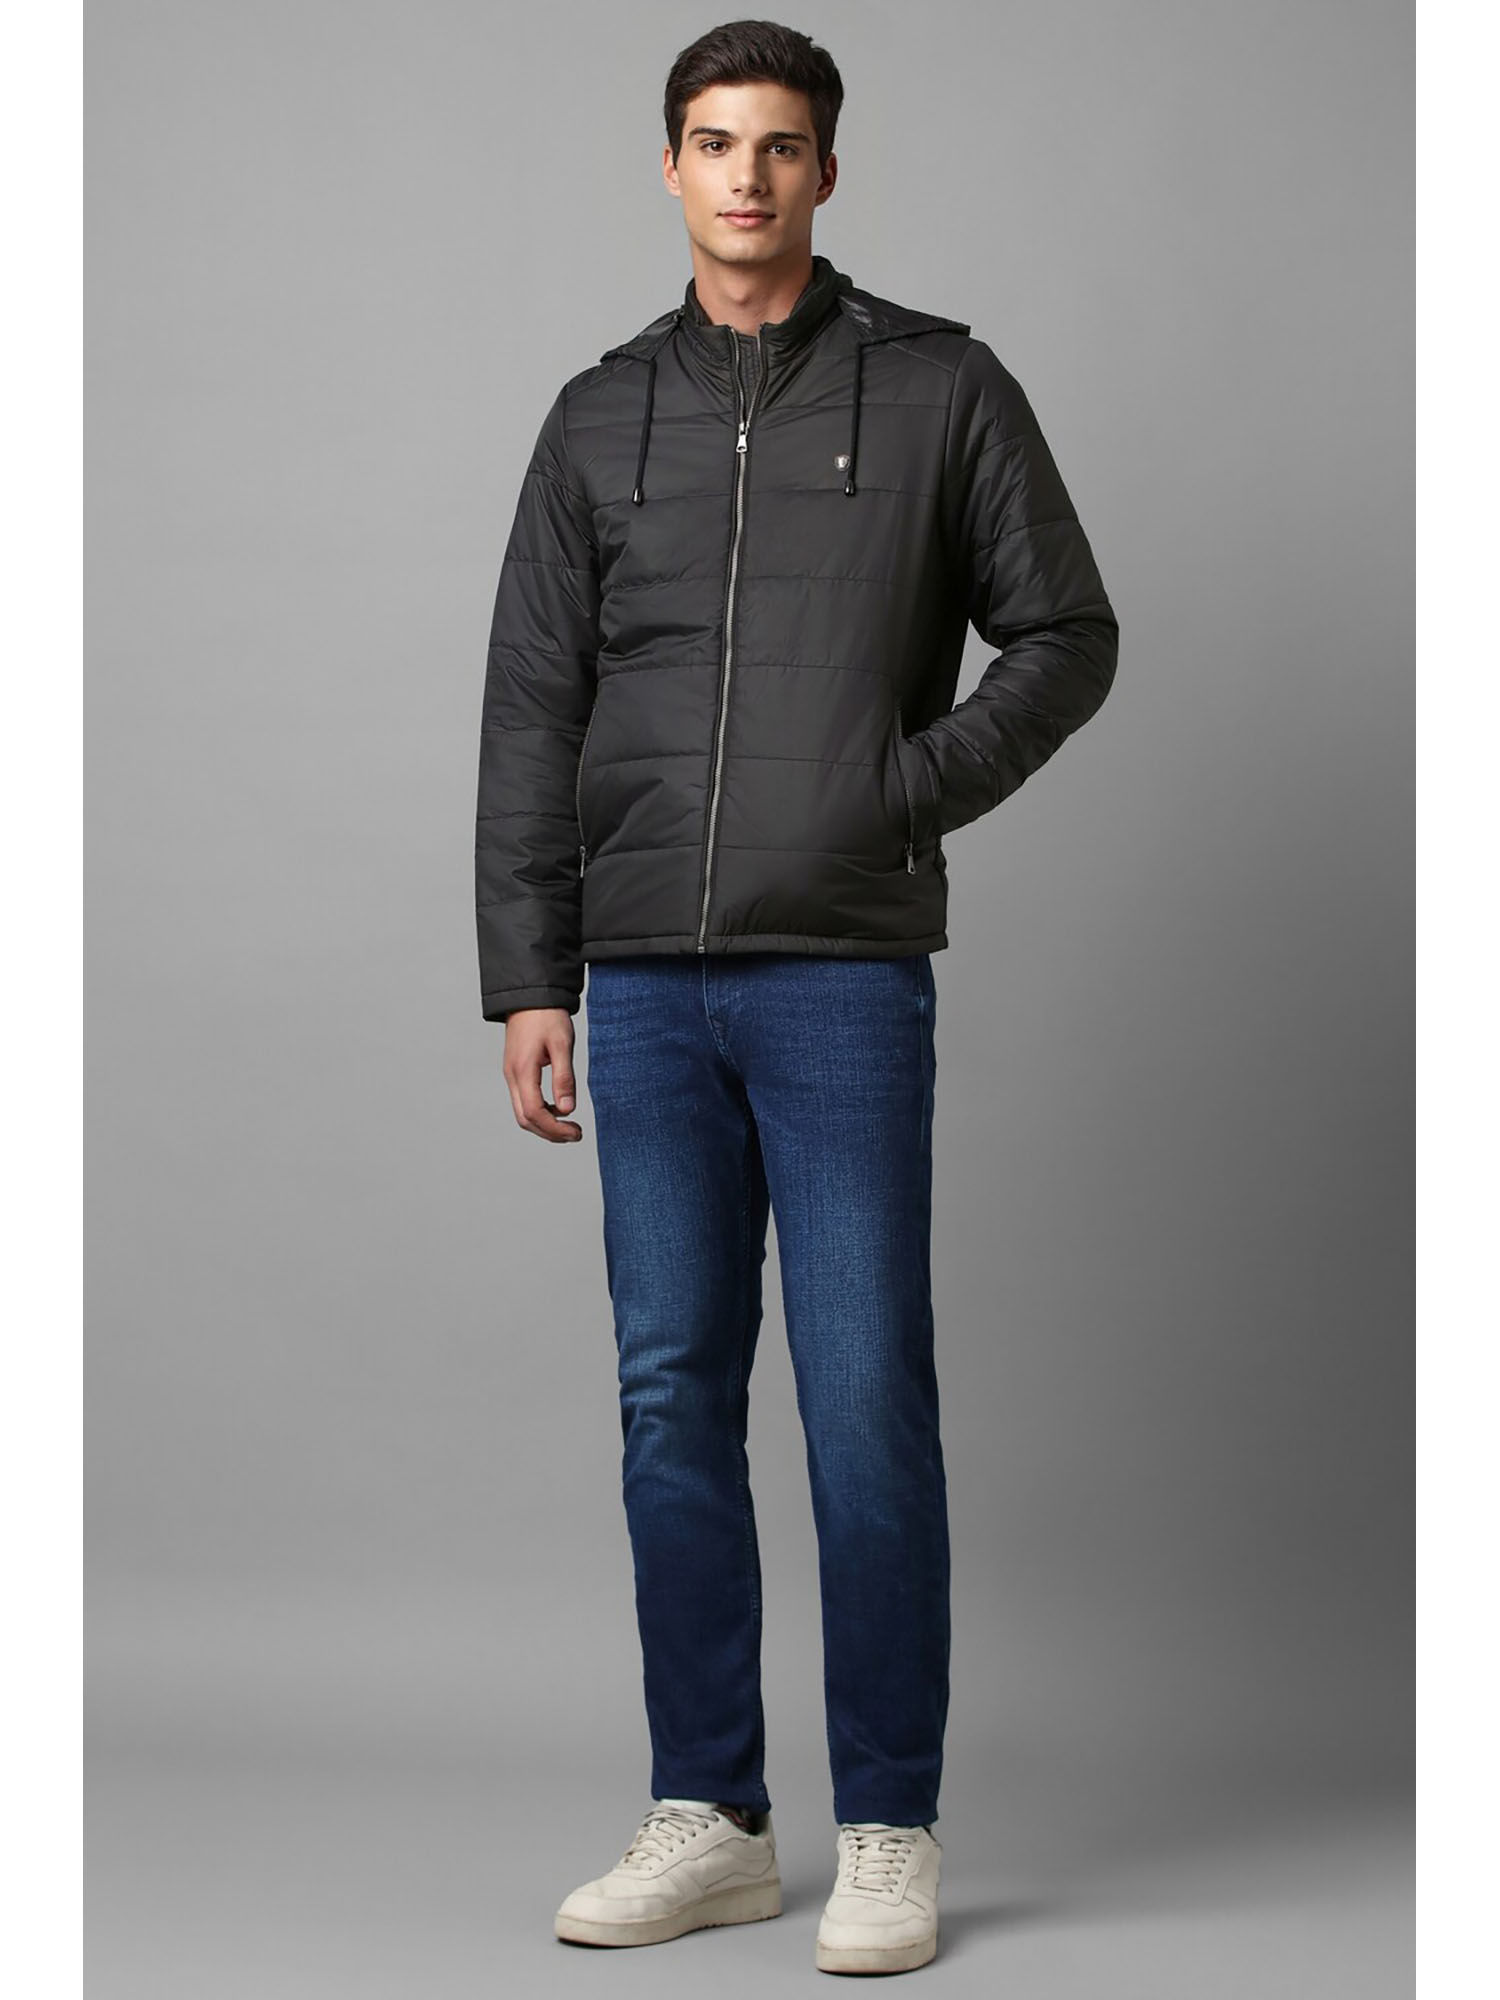 Buy Louis Philippe Denim Jackets Online At Best Price Offers In India